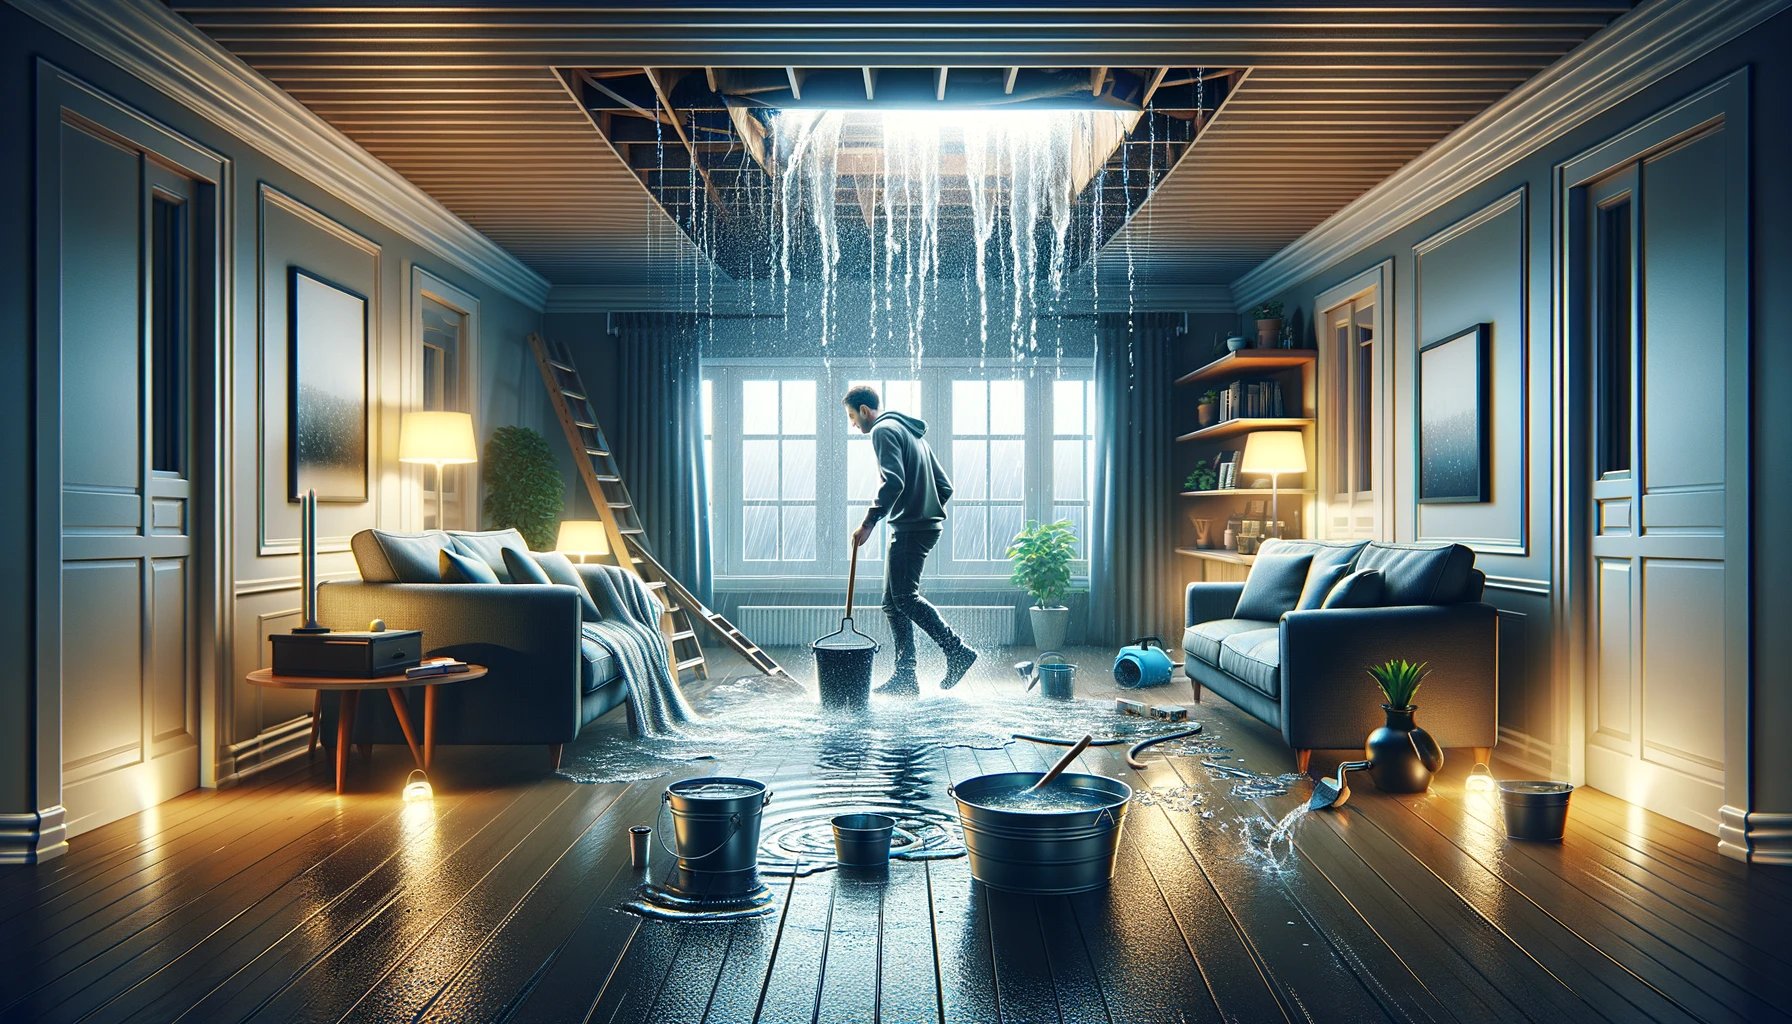 what to do if roof leaks during storm